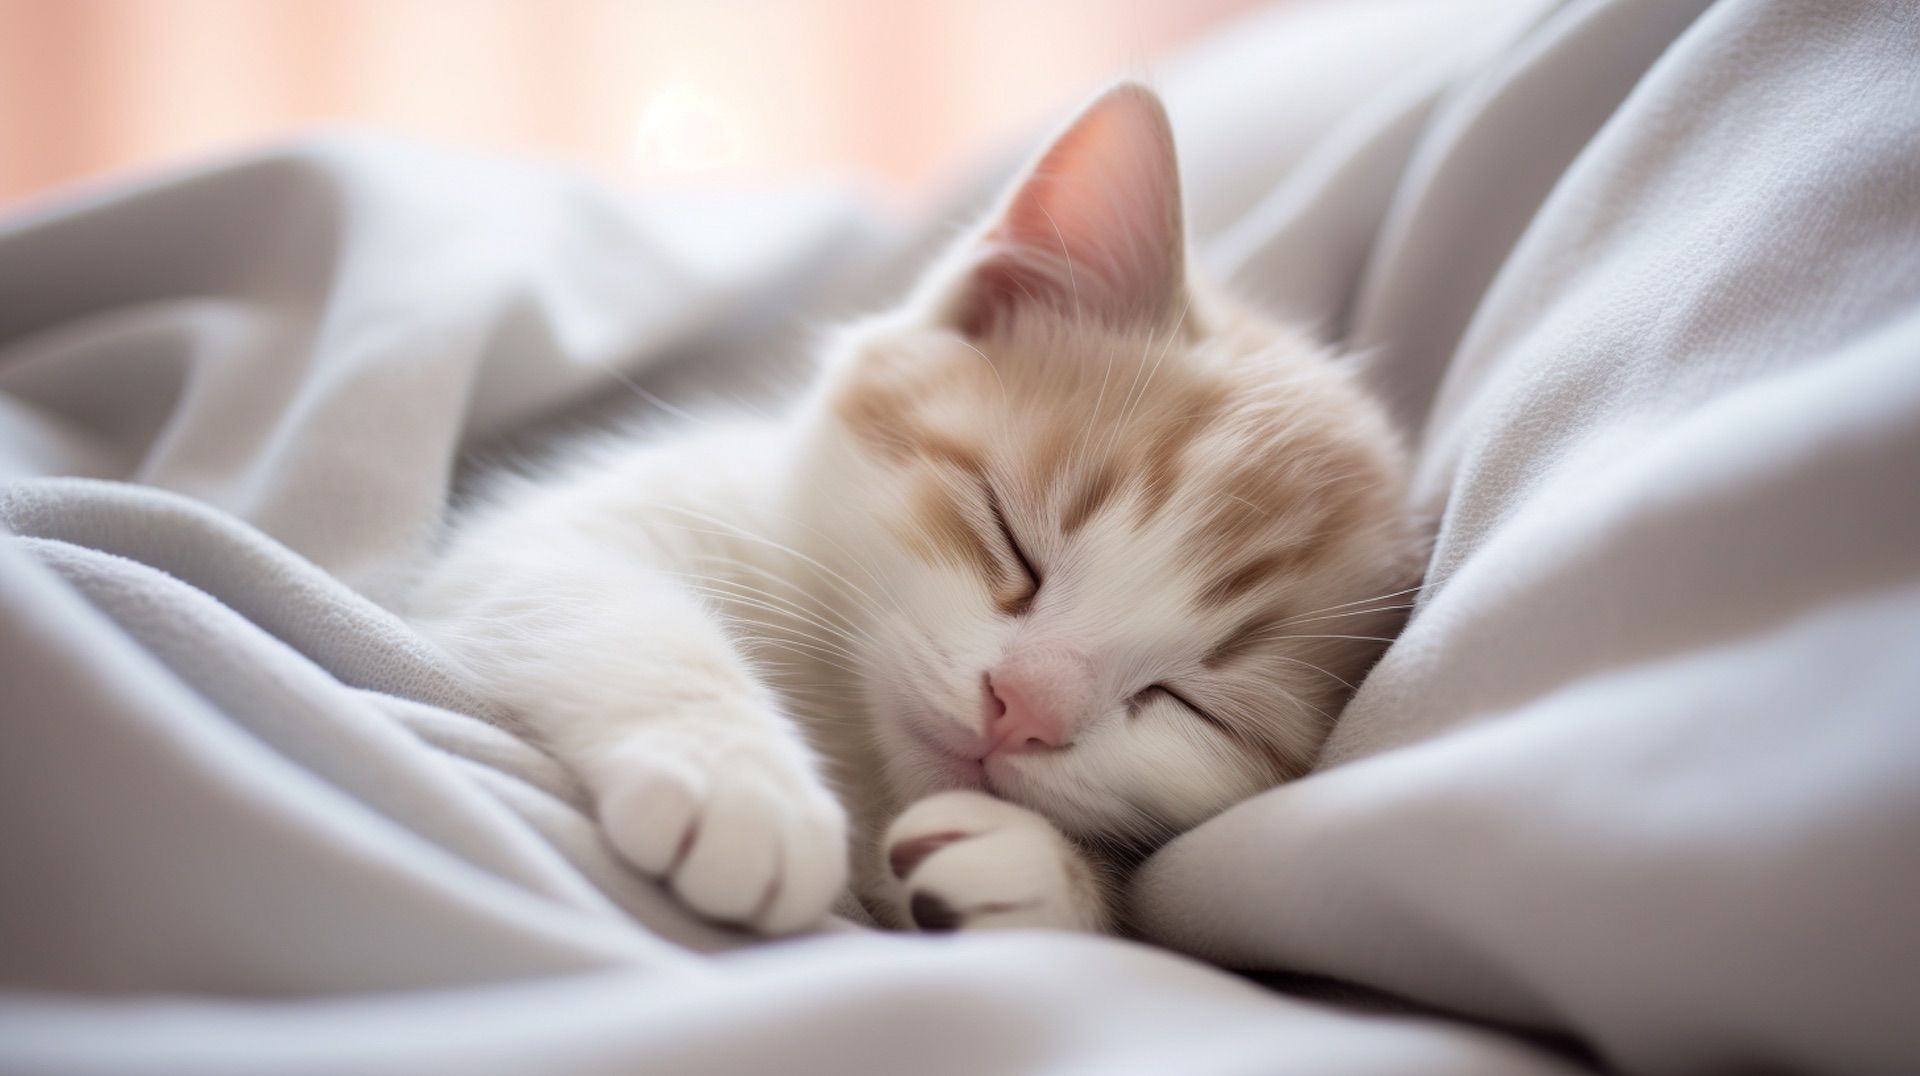 A cute kitten sleeping and tucked up in a light blanket